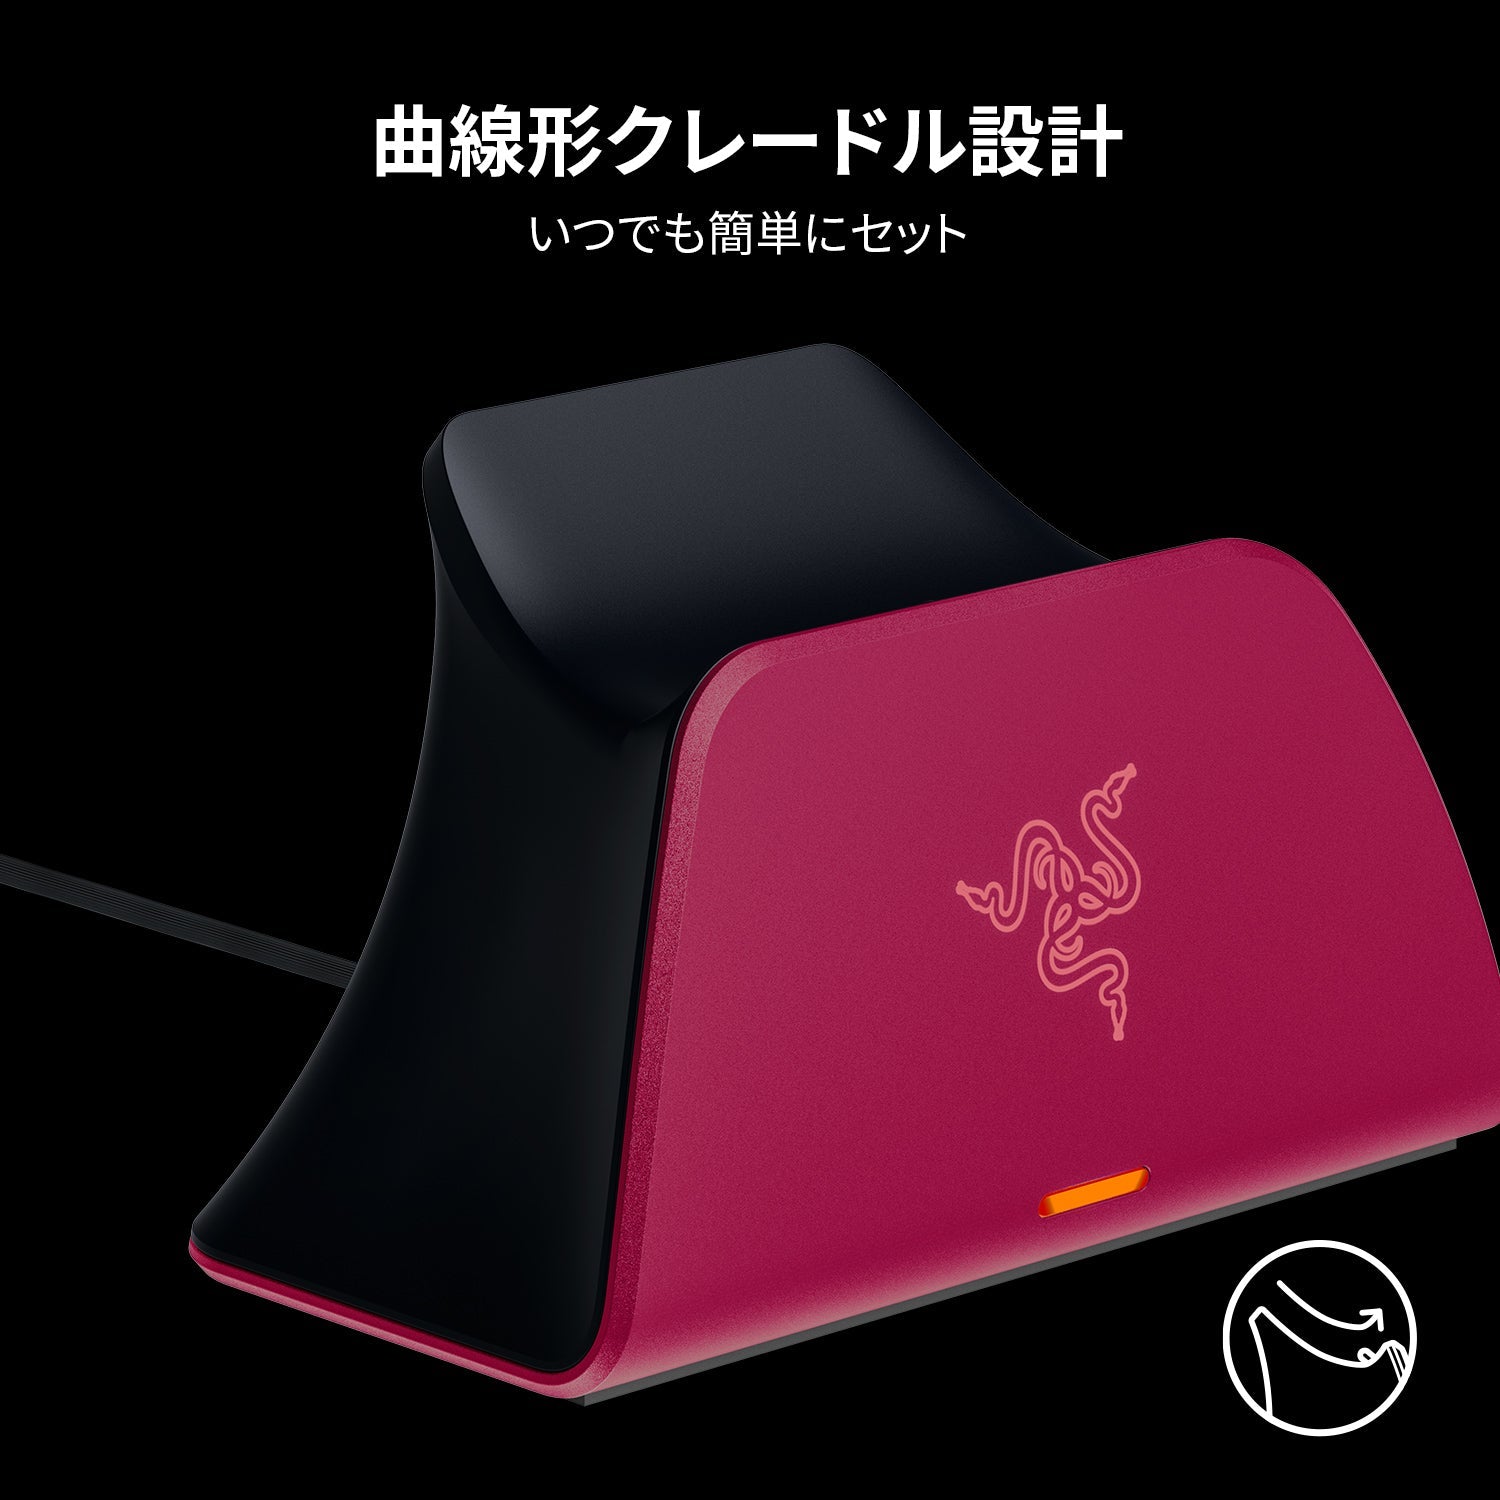 Razer Quick Charging Stand for PS5 (Blue)  クイック チャージング スタンド フォー ピーエスファイブ ブルー thumbnail 3